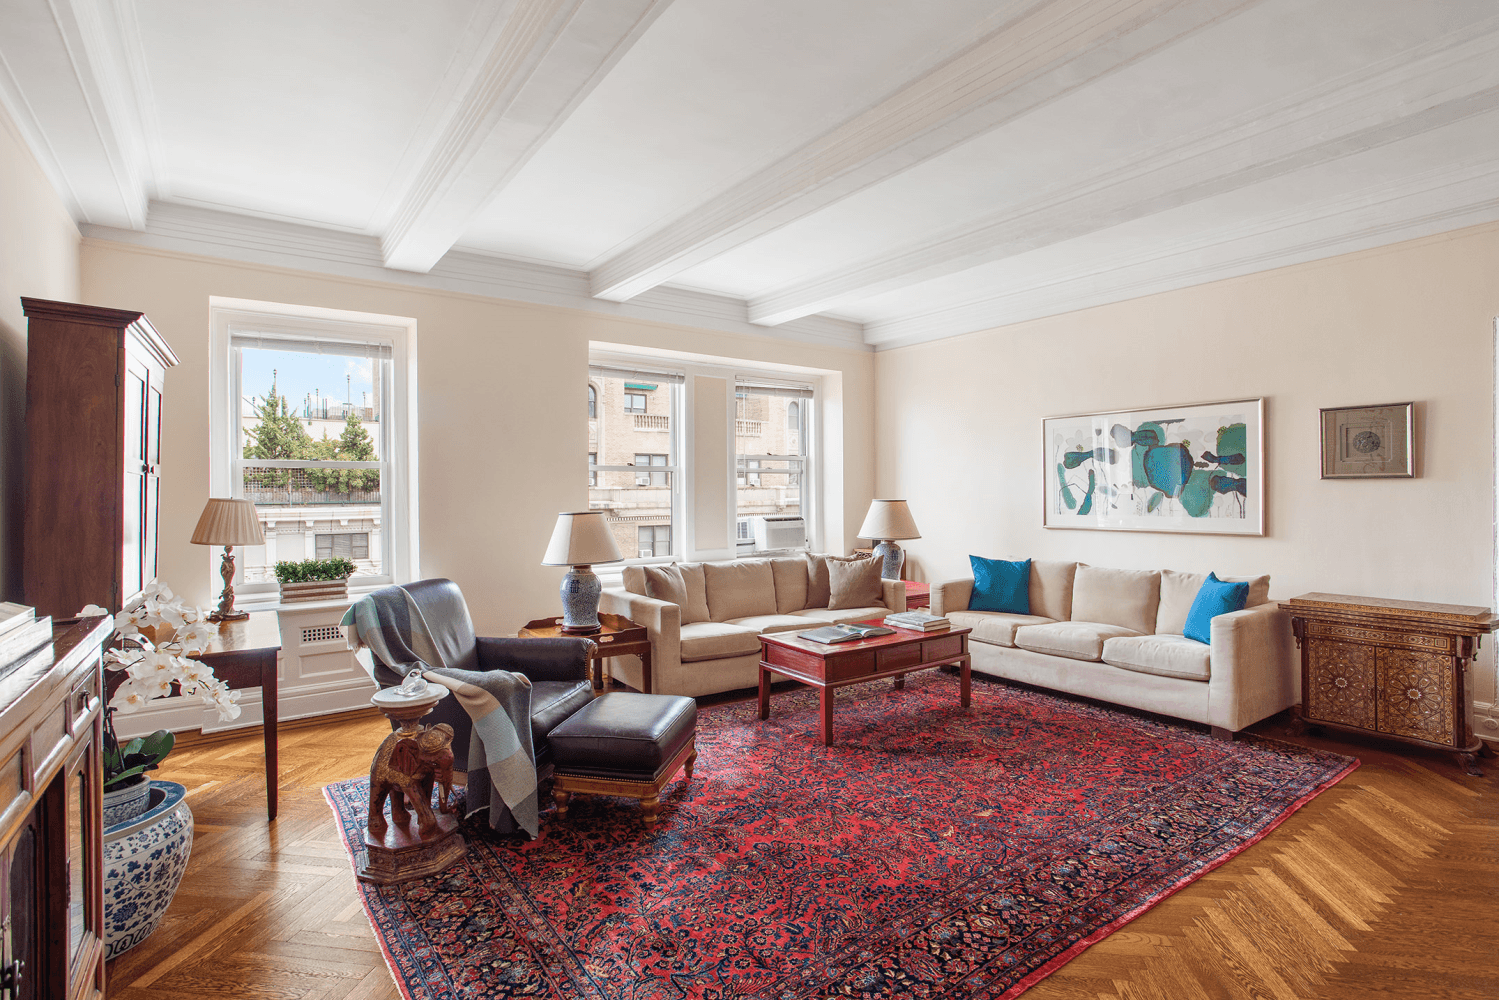 Step into this stunning, sunlit residence featuring three king size bedrooms, two renovated baths, and a spacious living room offering picturesque views of Riverside Park and the Hudson River.